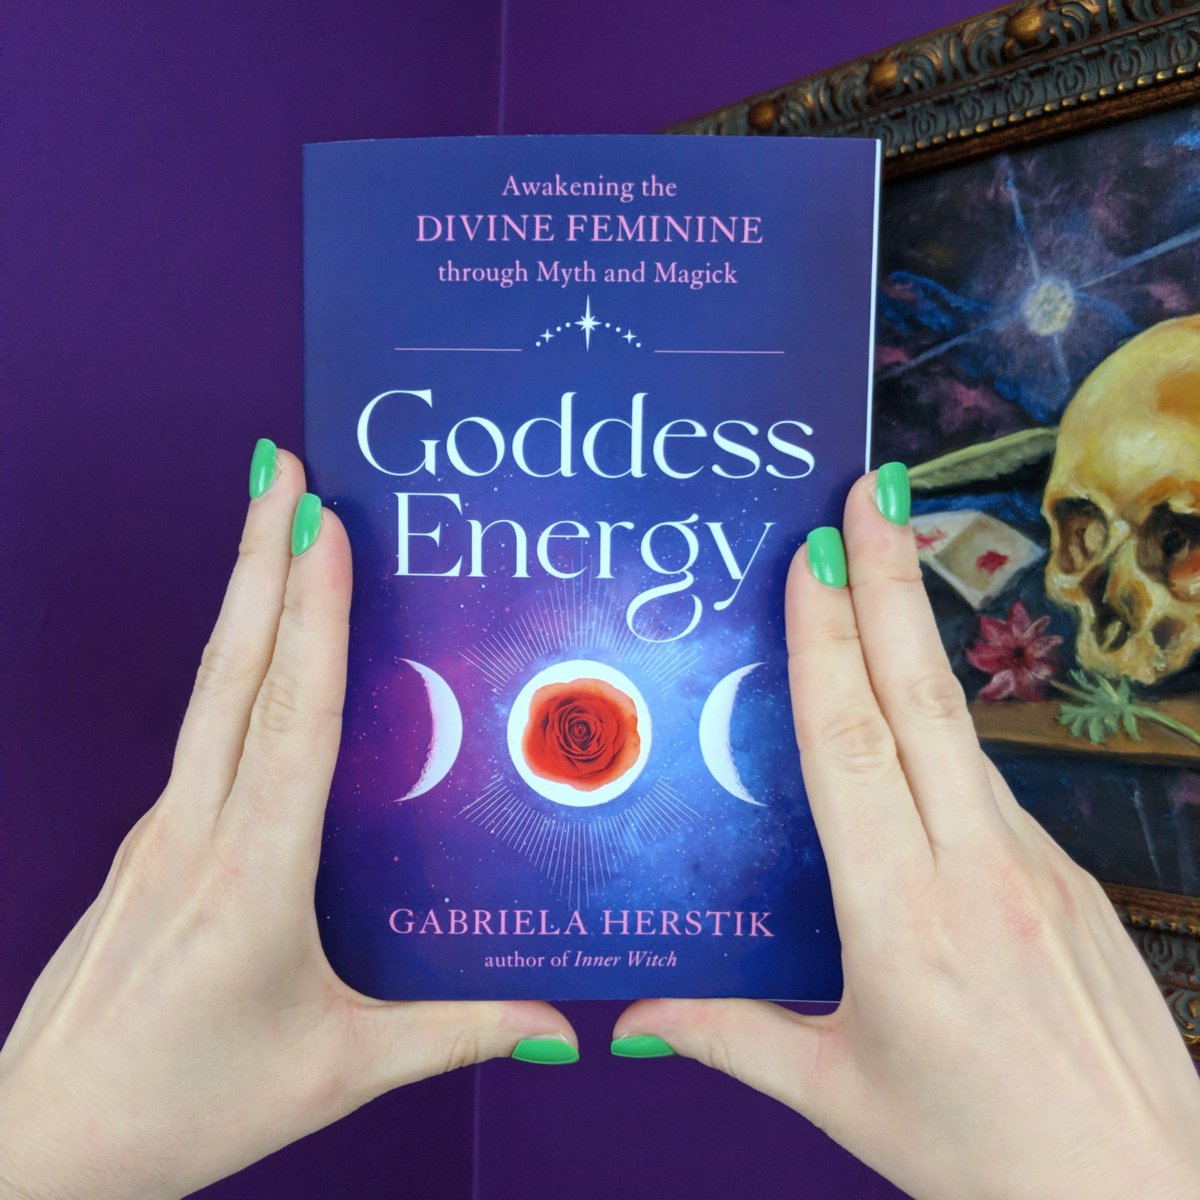 I am overjoyed to receive a copy of Goddess Energy by @GabyHerstik . I think the subject of the divine feminine is an incredibly important one. I am looking forward to diving into this! Thank you to @TarcherPerigee for sending me a copy.